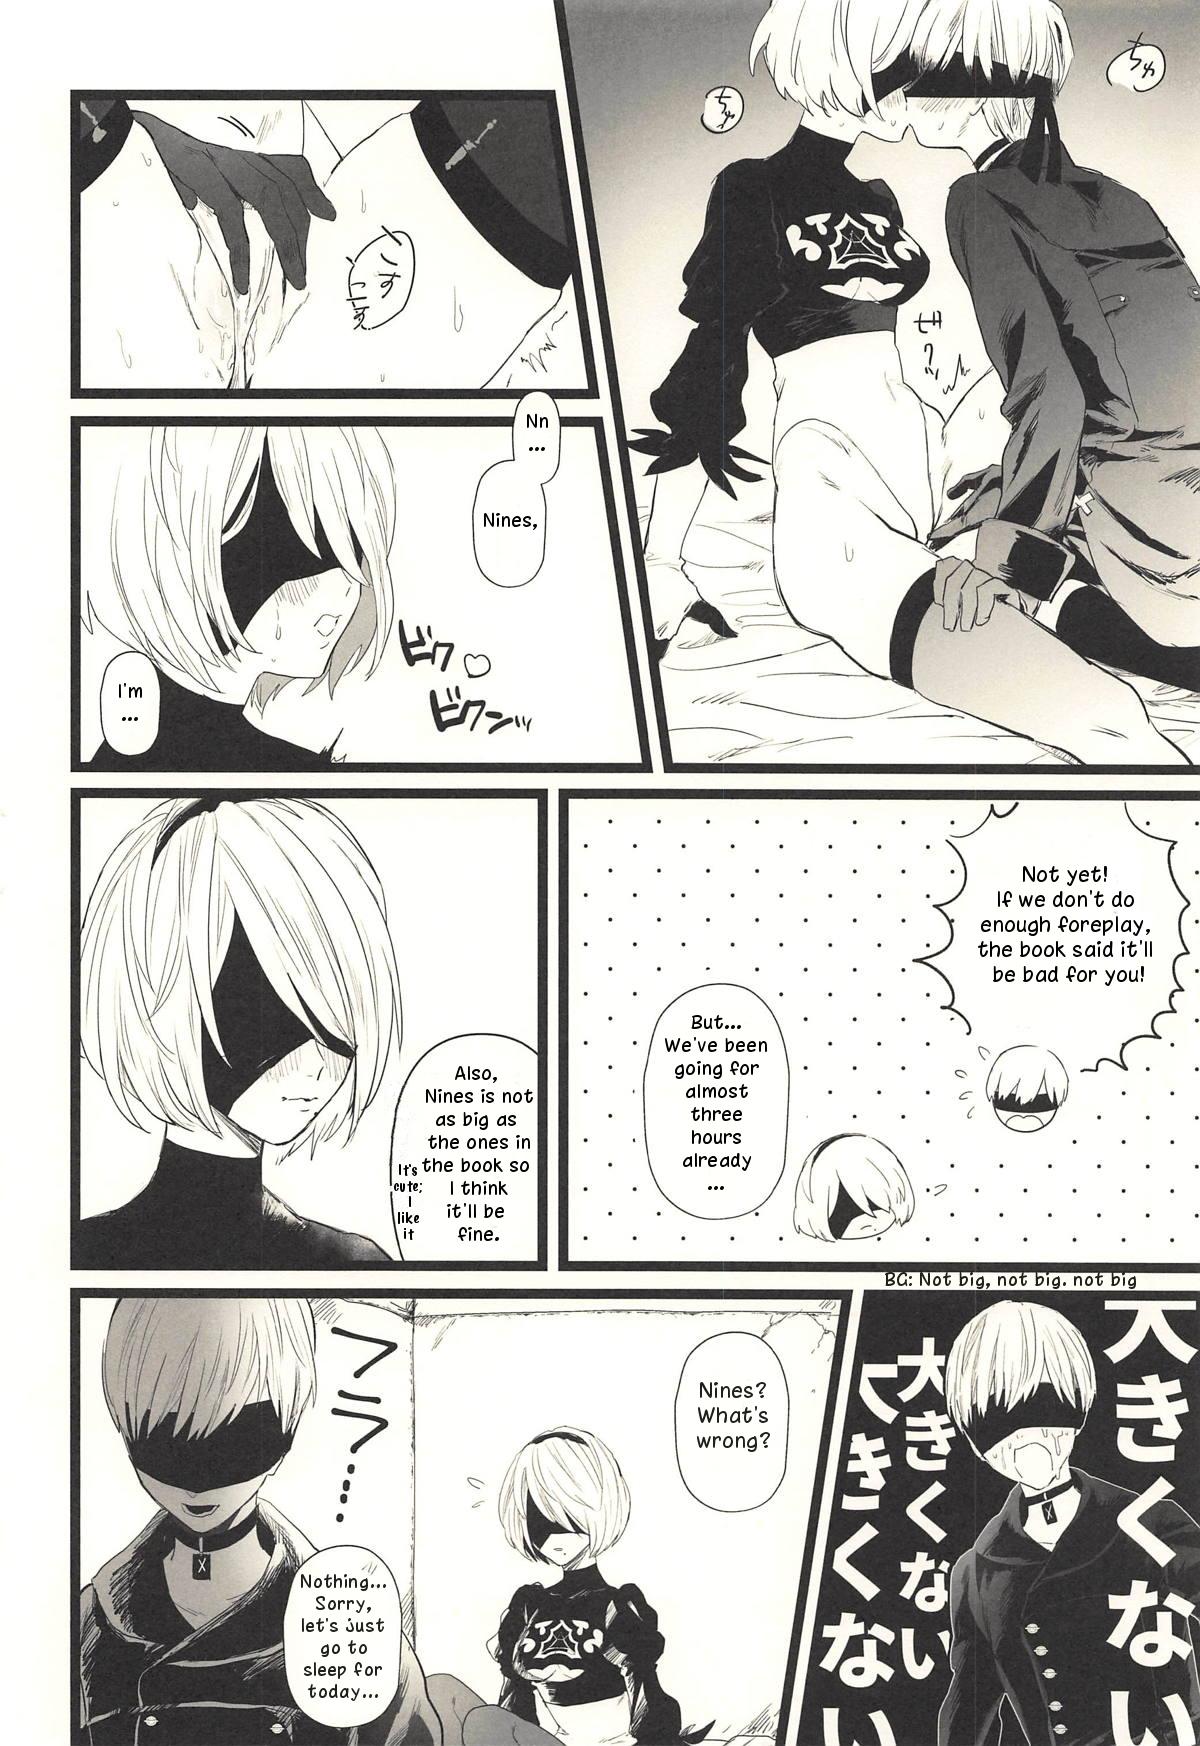 Punishment ONE MORE TIME - Nier automata Pain - Page 3